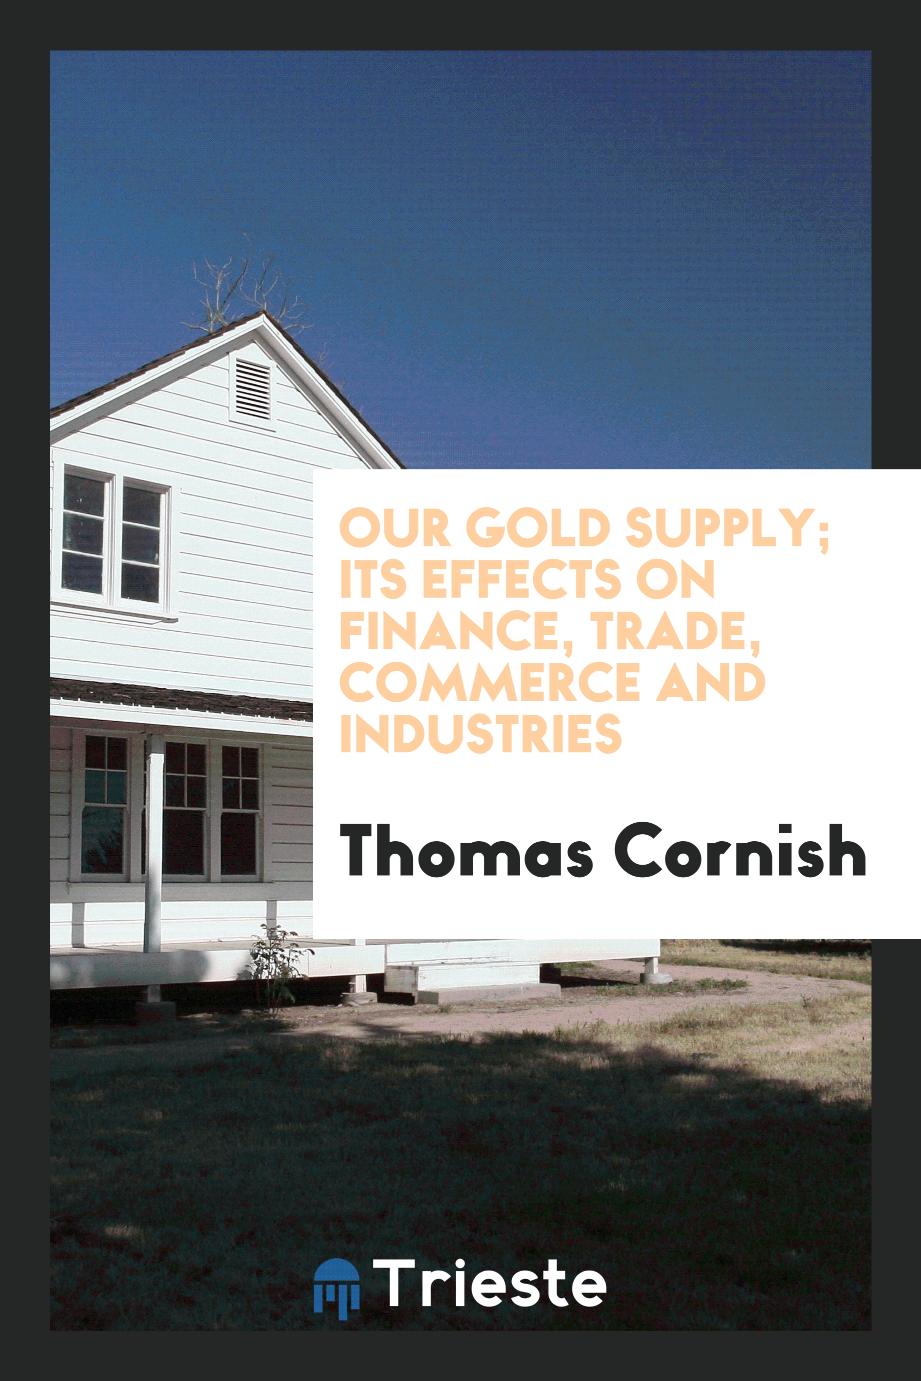 Our gold supply; its effects on finance, trade, commerce and industries